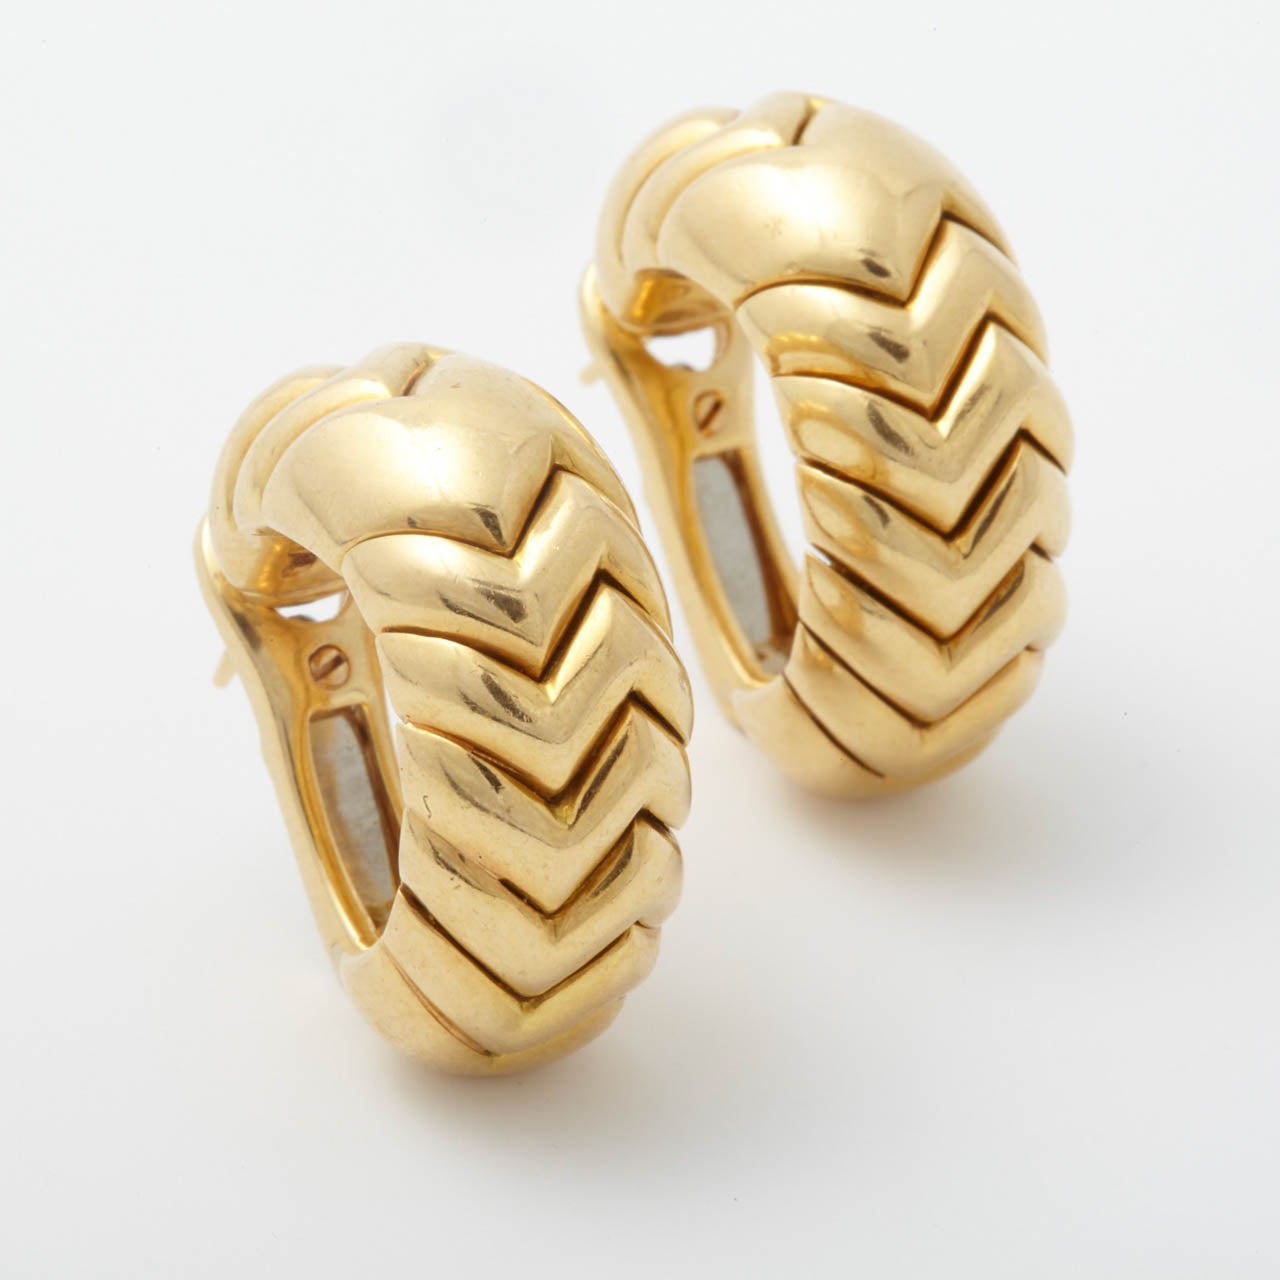 A pair of 18k yellow gold â??Spigaâ?? hoop earrings. Engraved Bulgari.

All of our prices exclude VAT.